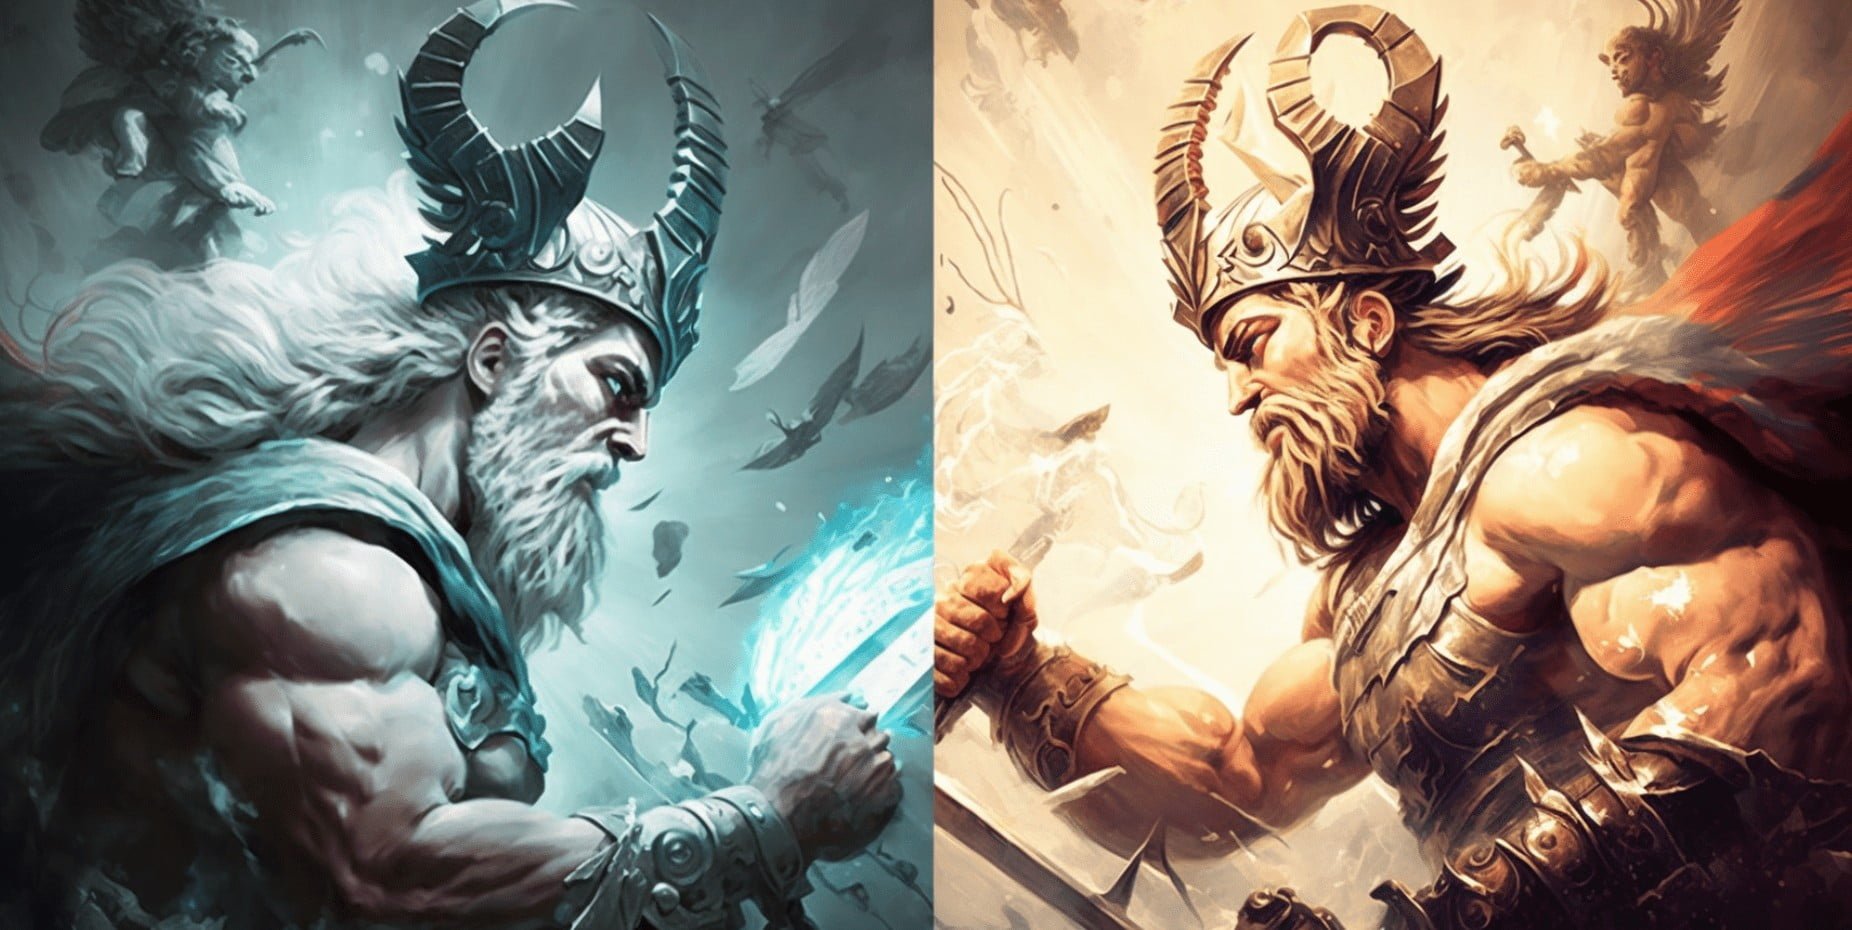 Odin Vs Zeus Who is Stronger Analysis- Battle of the Gods 